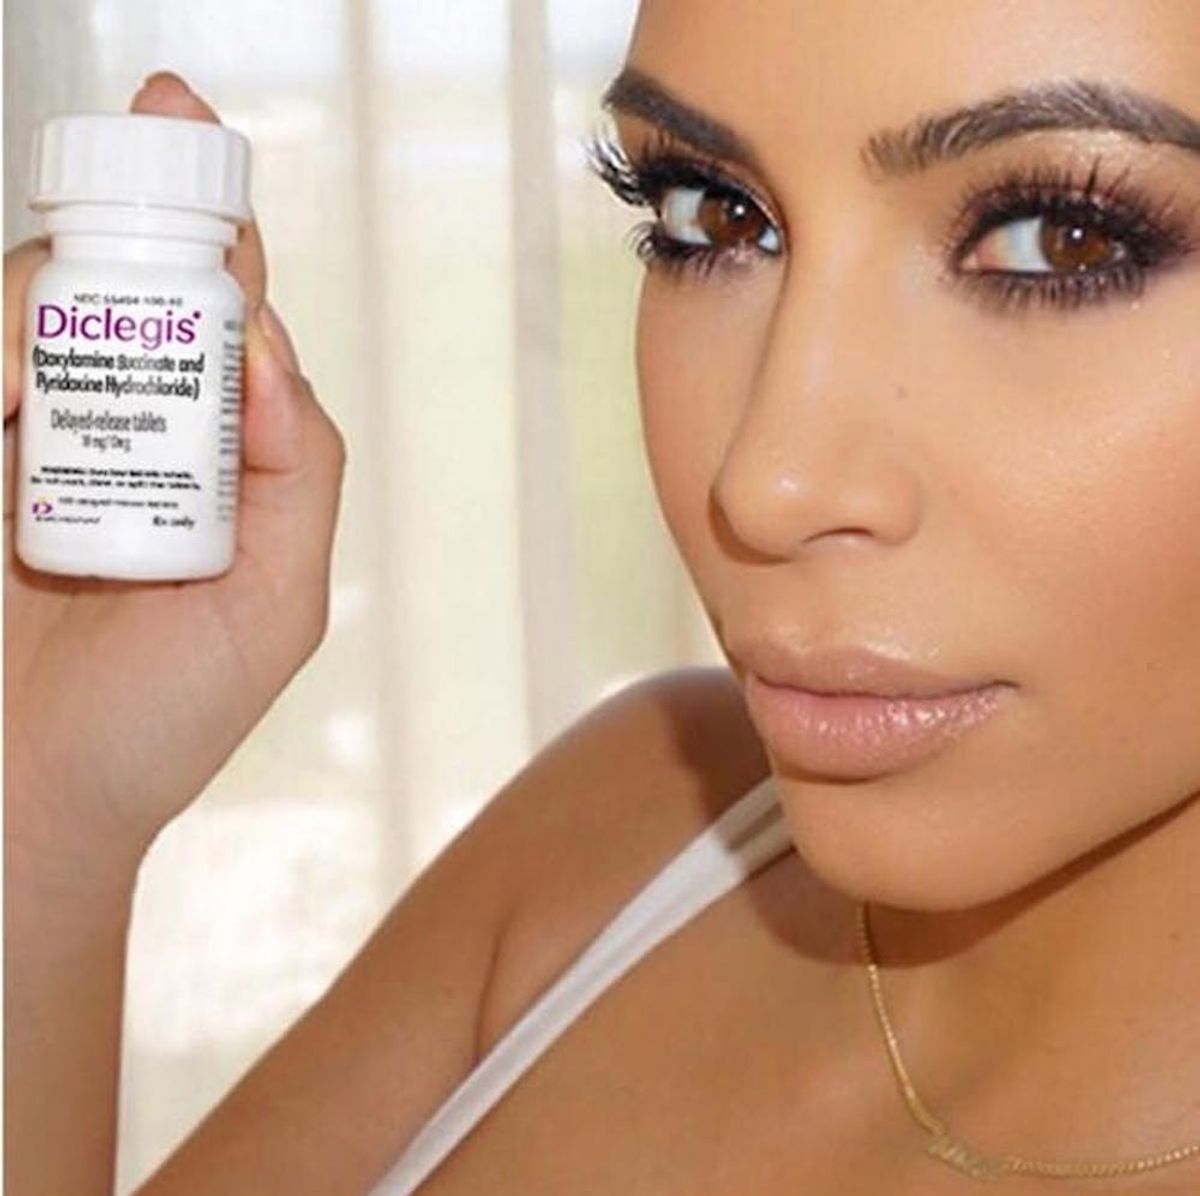 Why Kim Kardashian Is Catching Heat for Her Morning Sickness Treatment